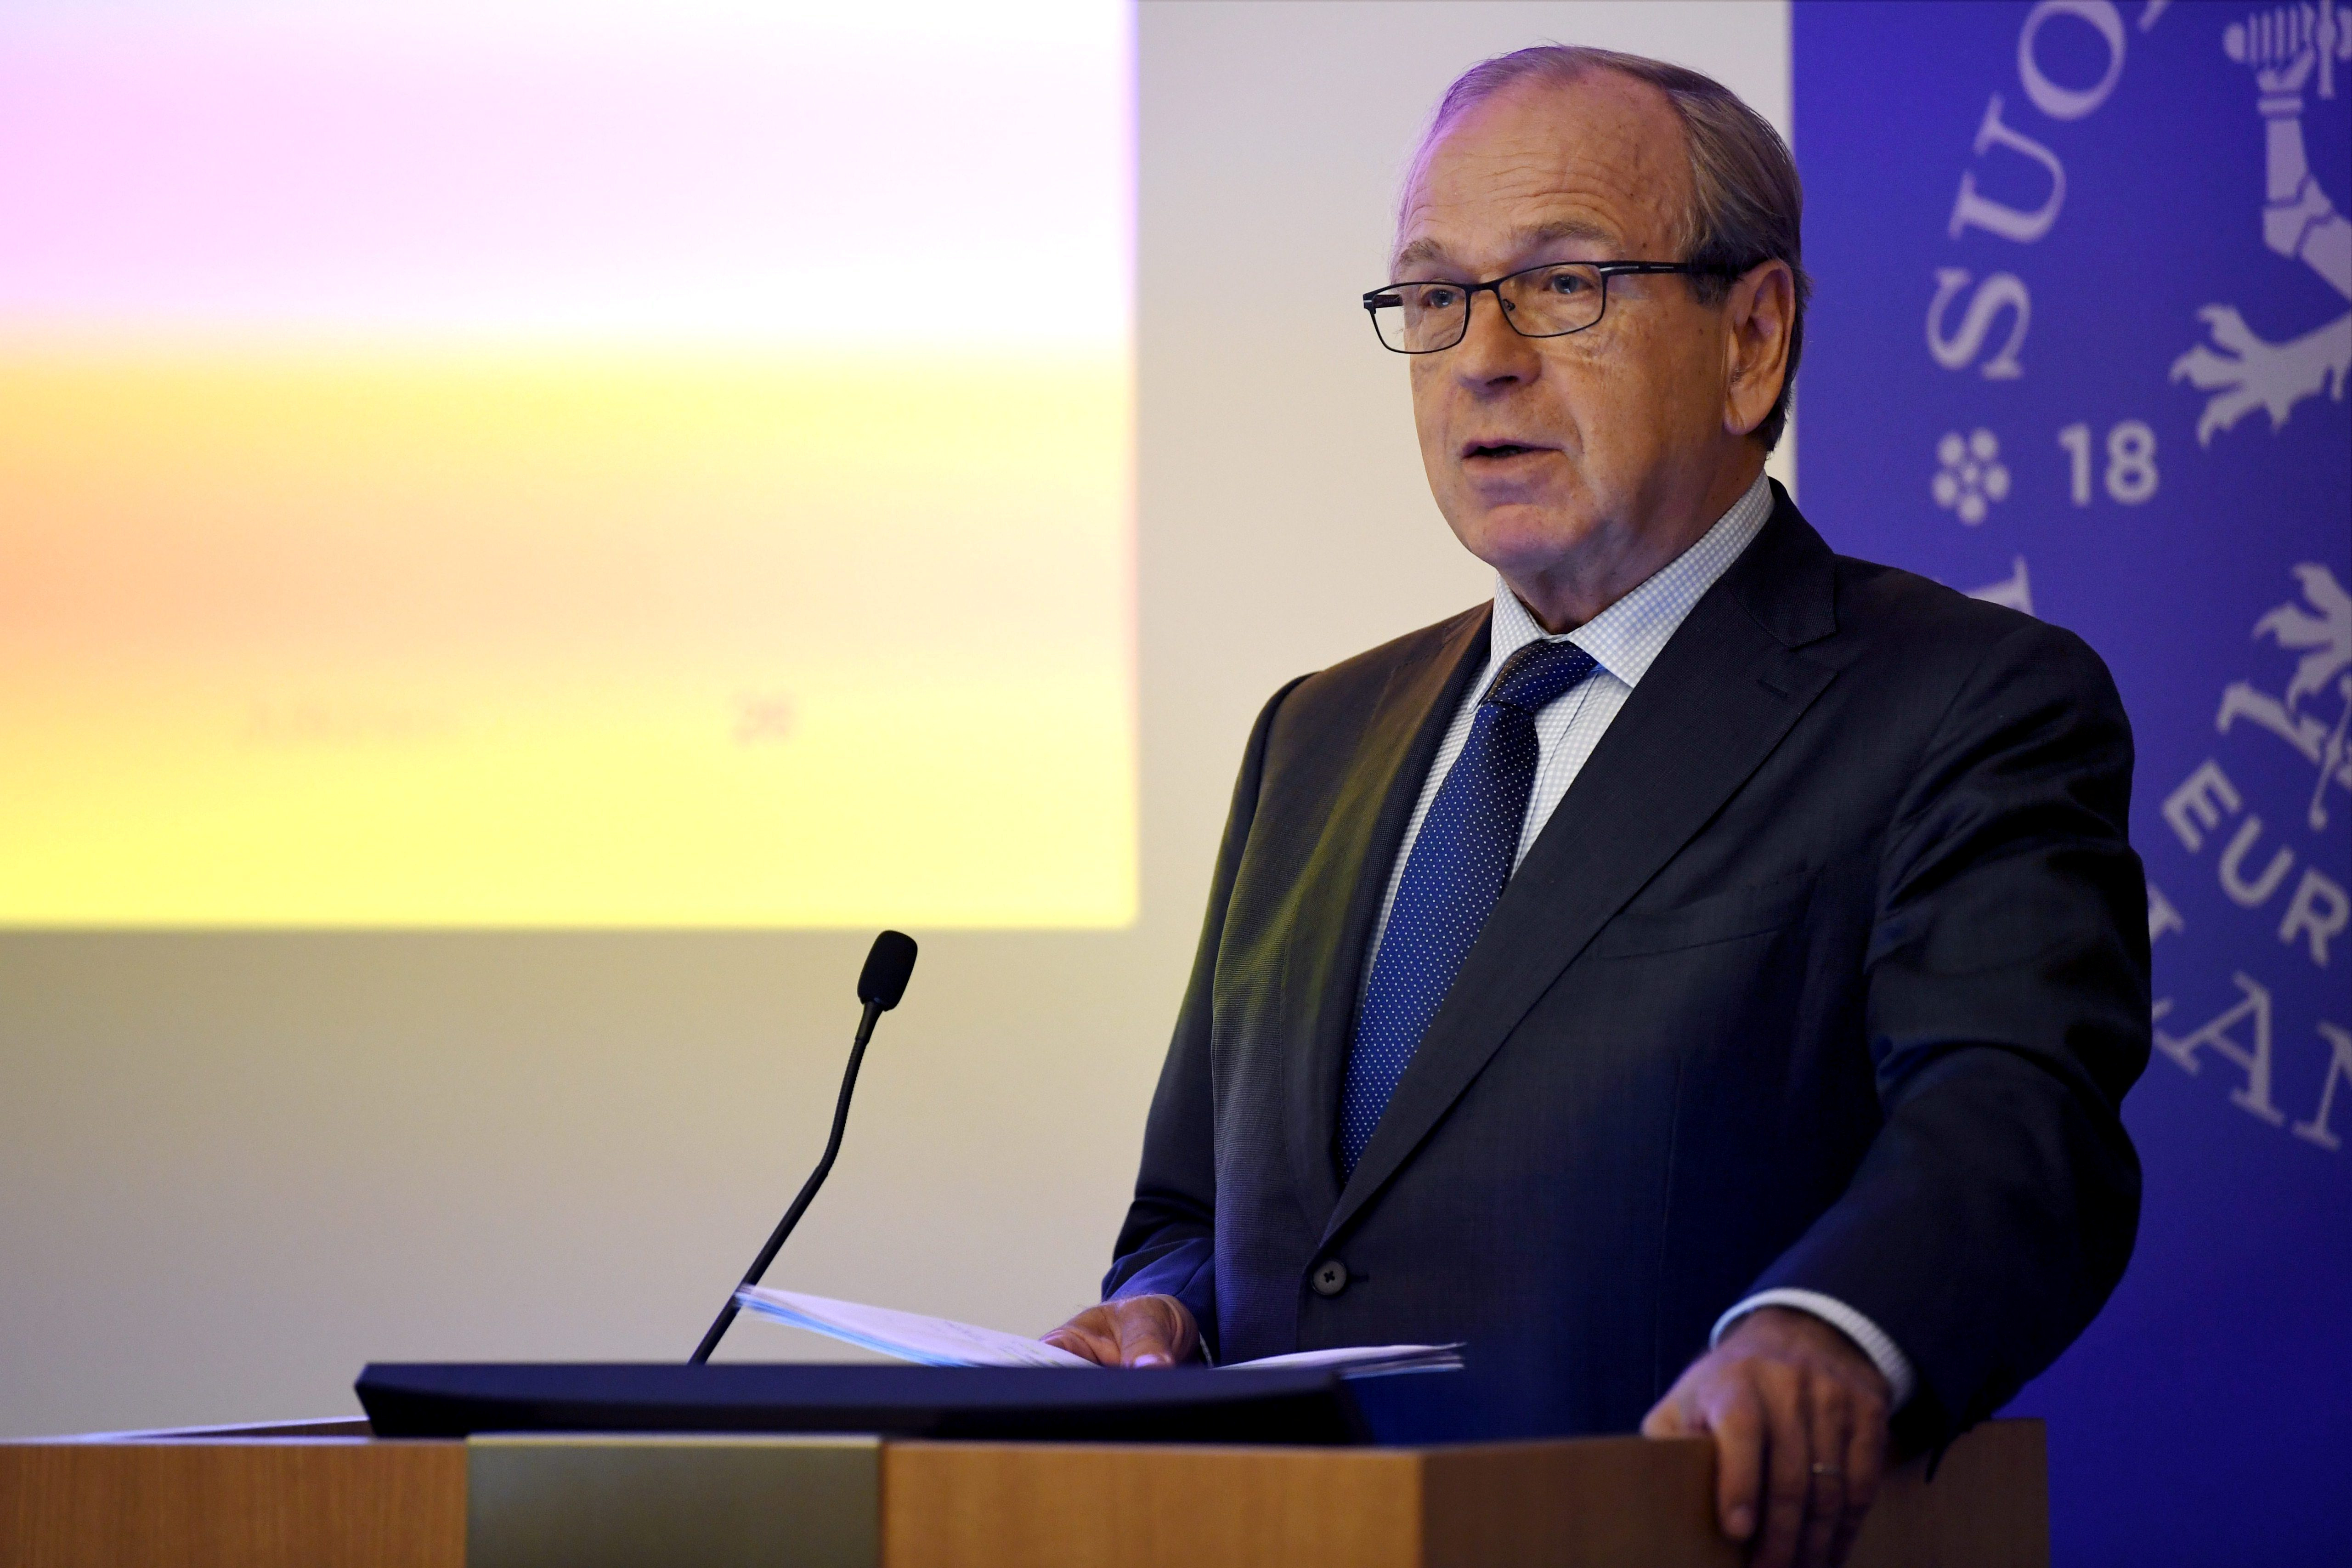 Bank of Finland Governor Erkki Liikanen speaks during a news conference in Helsinki